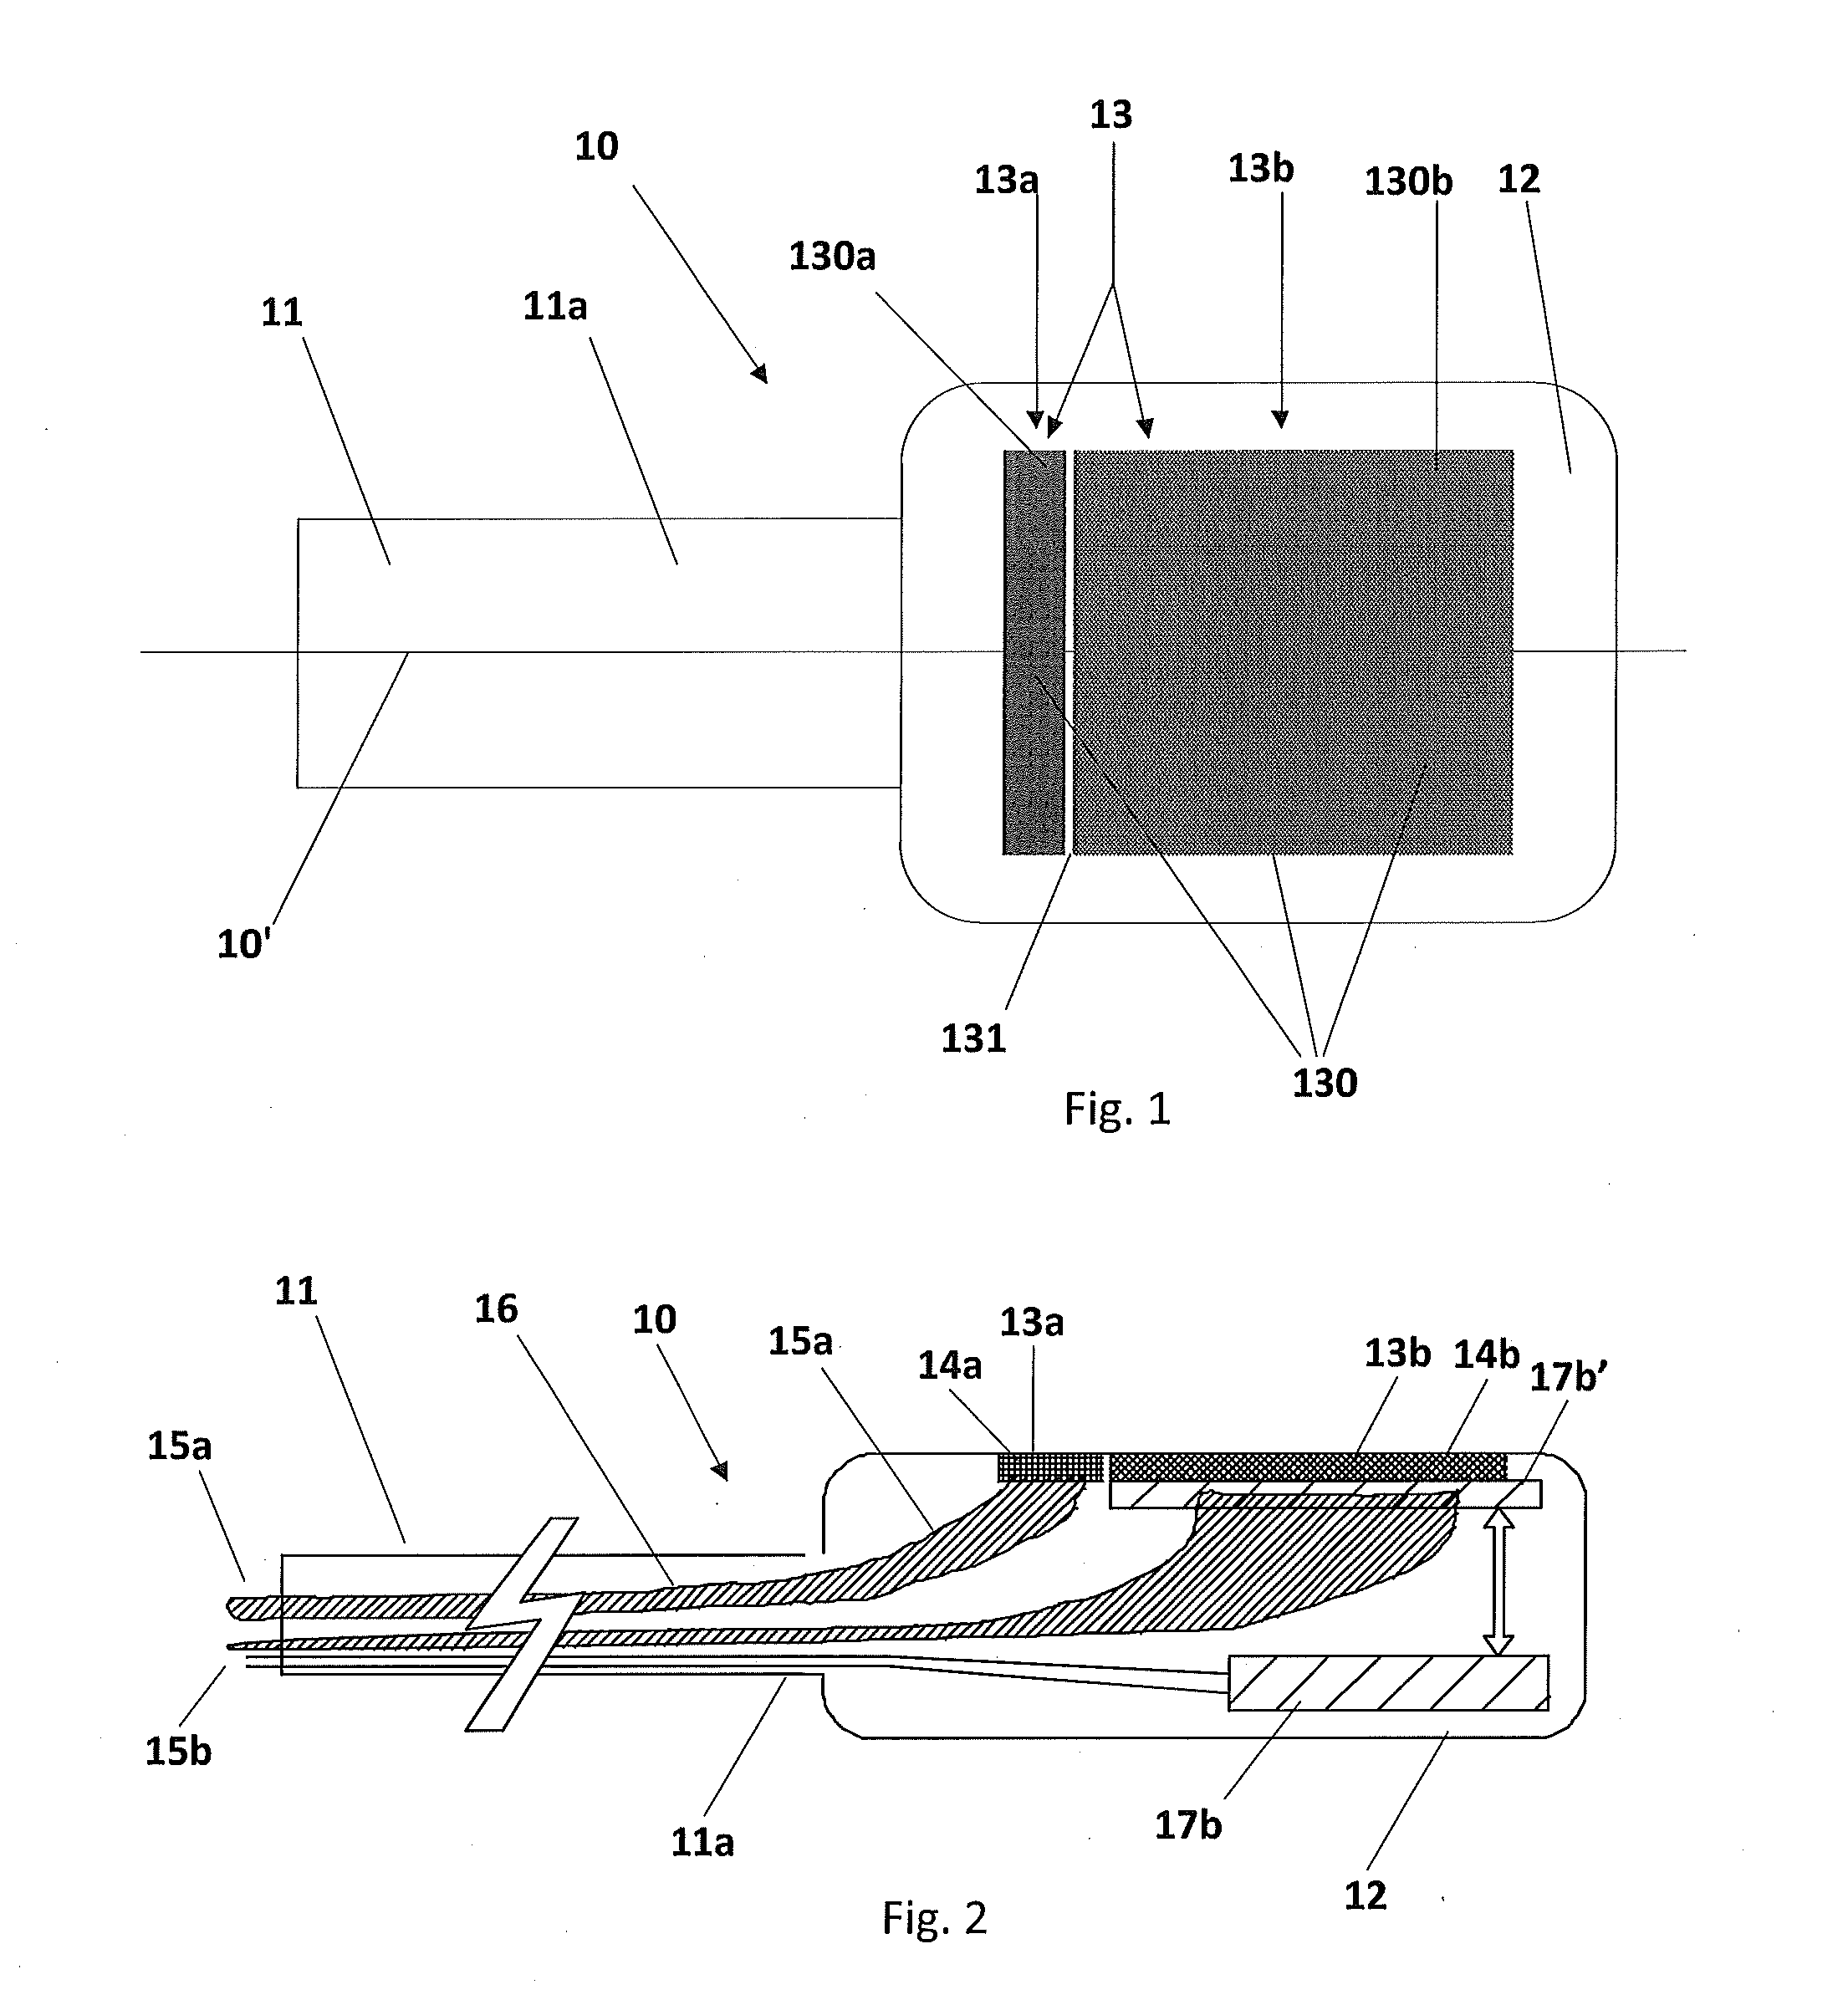 Method of manufacturing an ultrasound transducer and devices including an ultrasound transducer